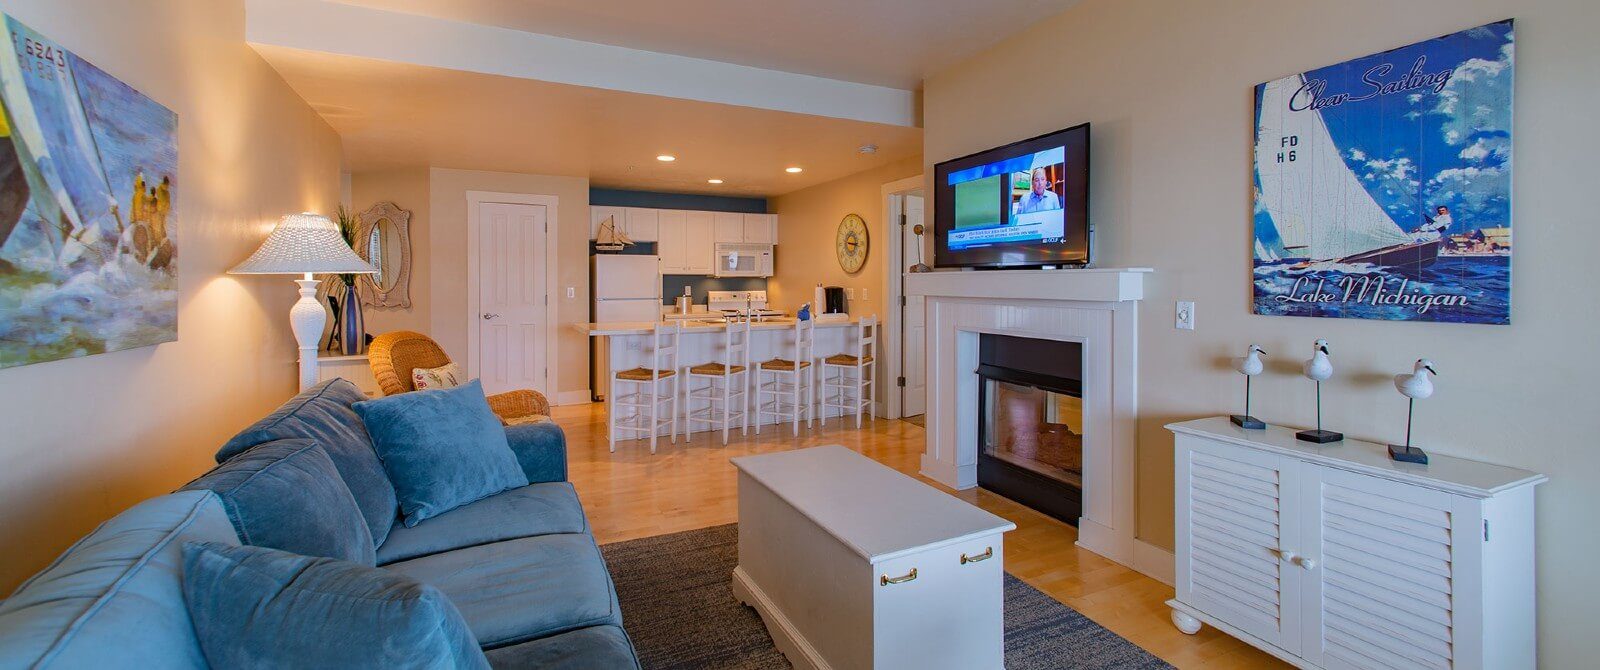 Large suite with kitchen, island with four stools, couch in front of a gas fireplace with TV on the mantle